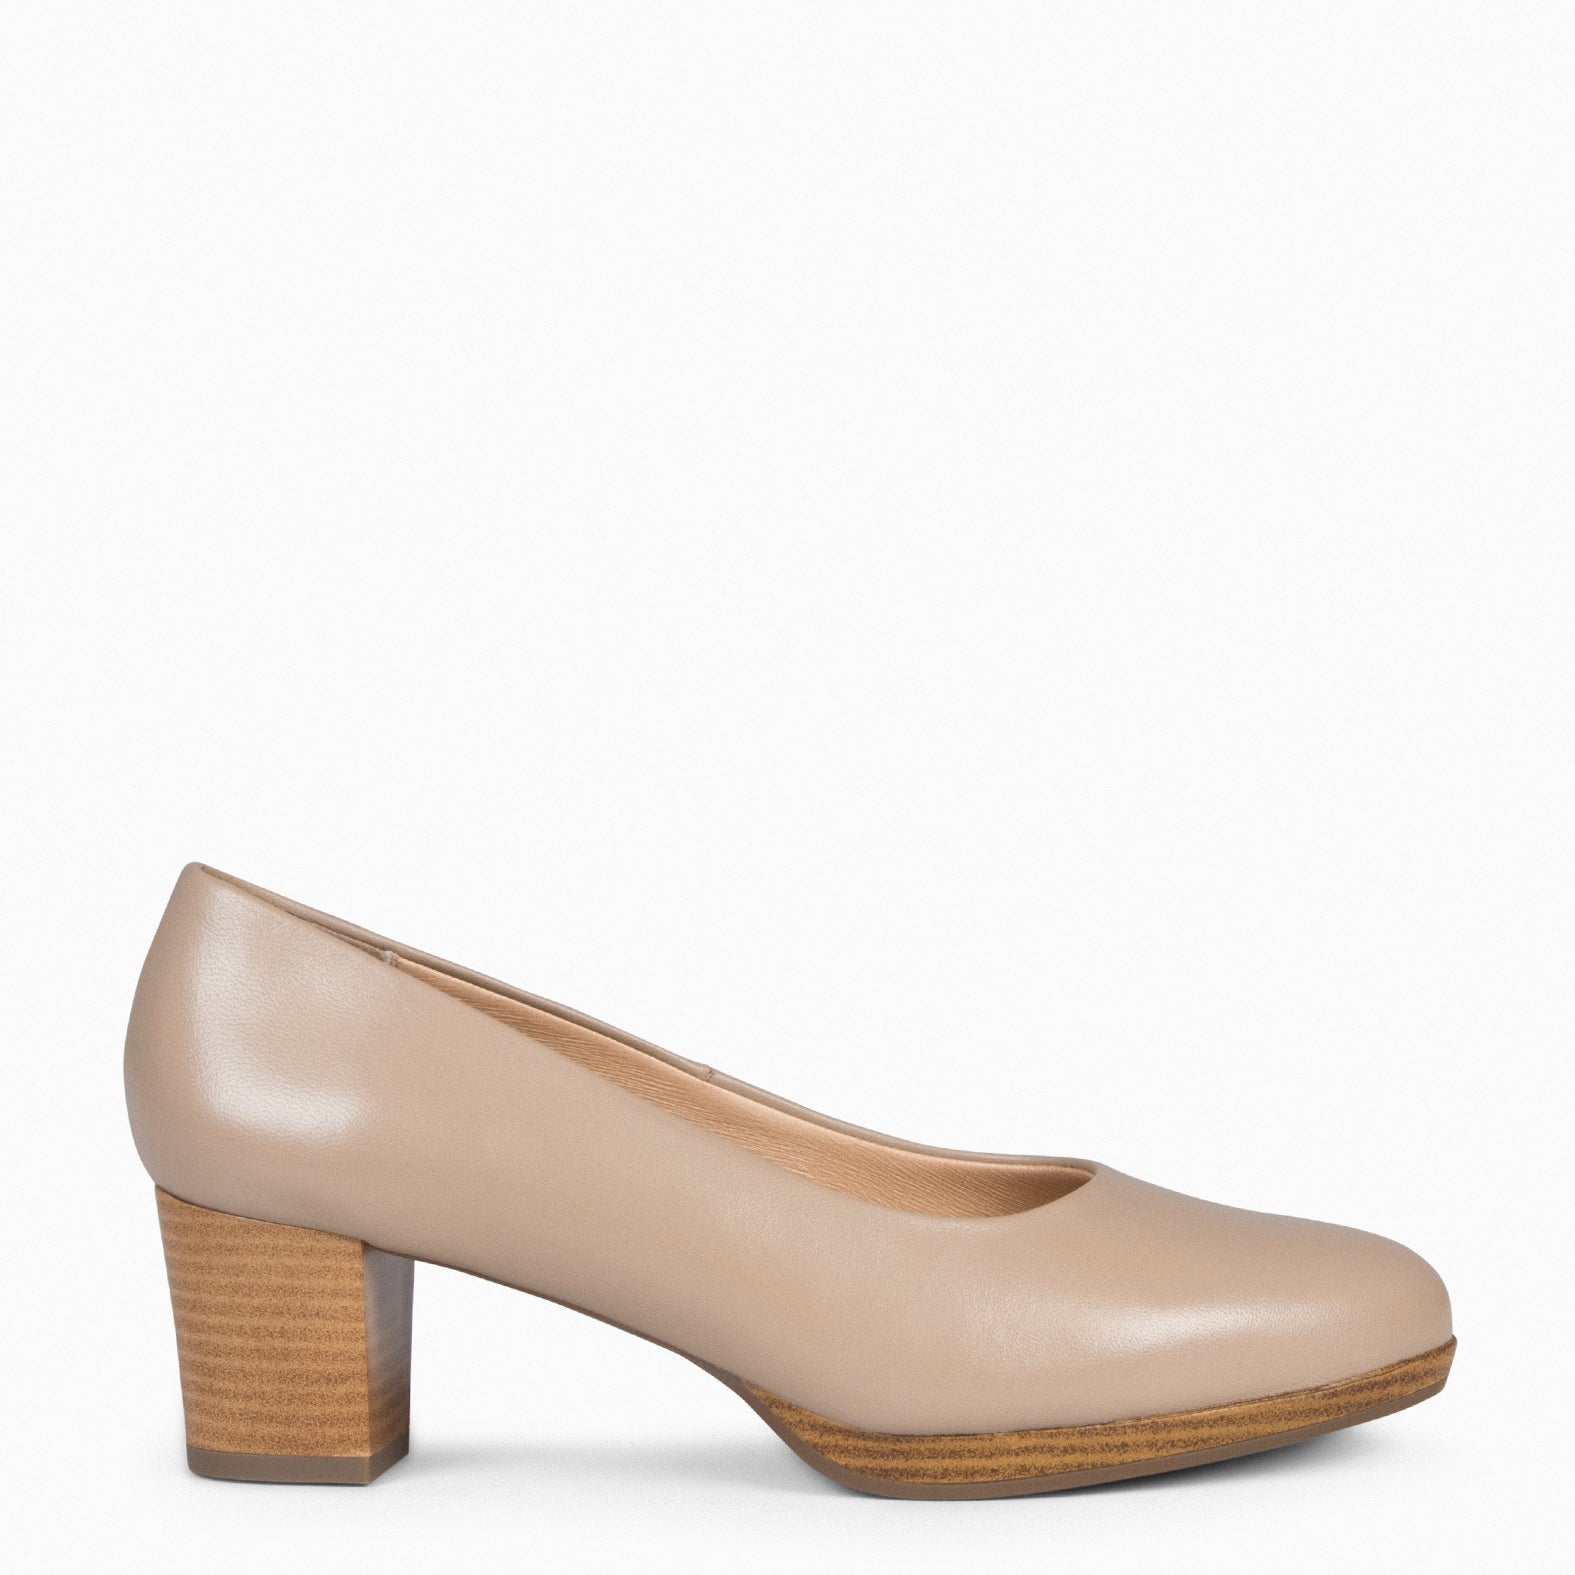 FLIGHT S – TAUPE shoes with low heel and platform